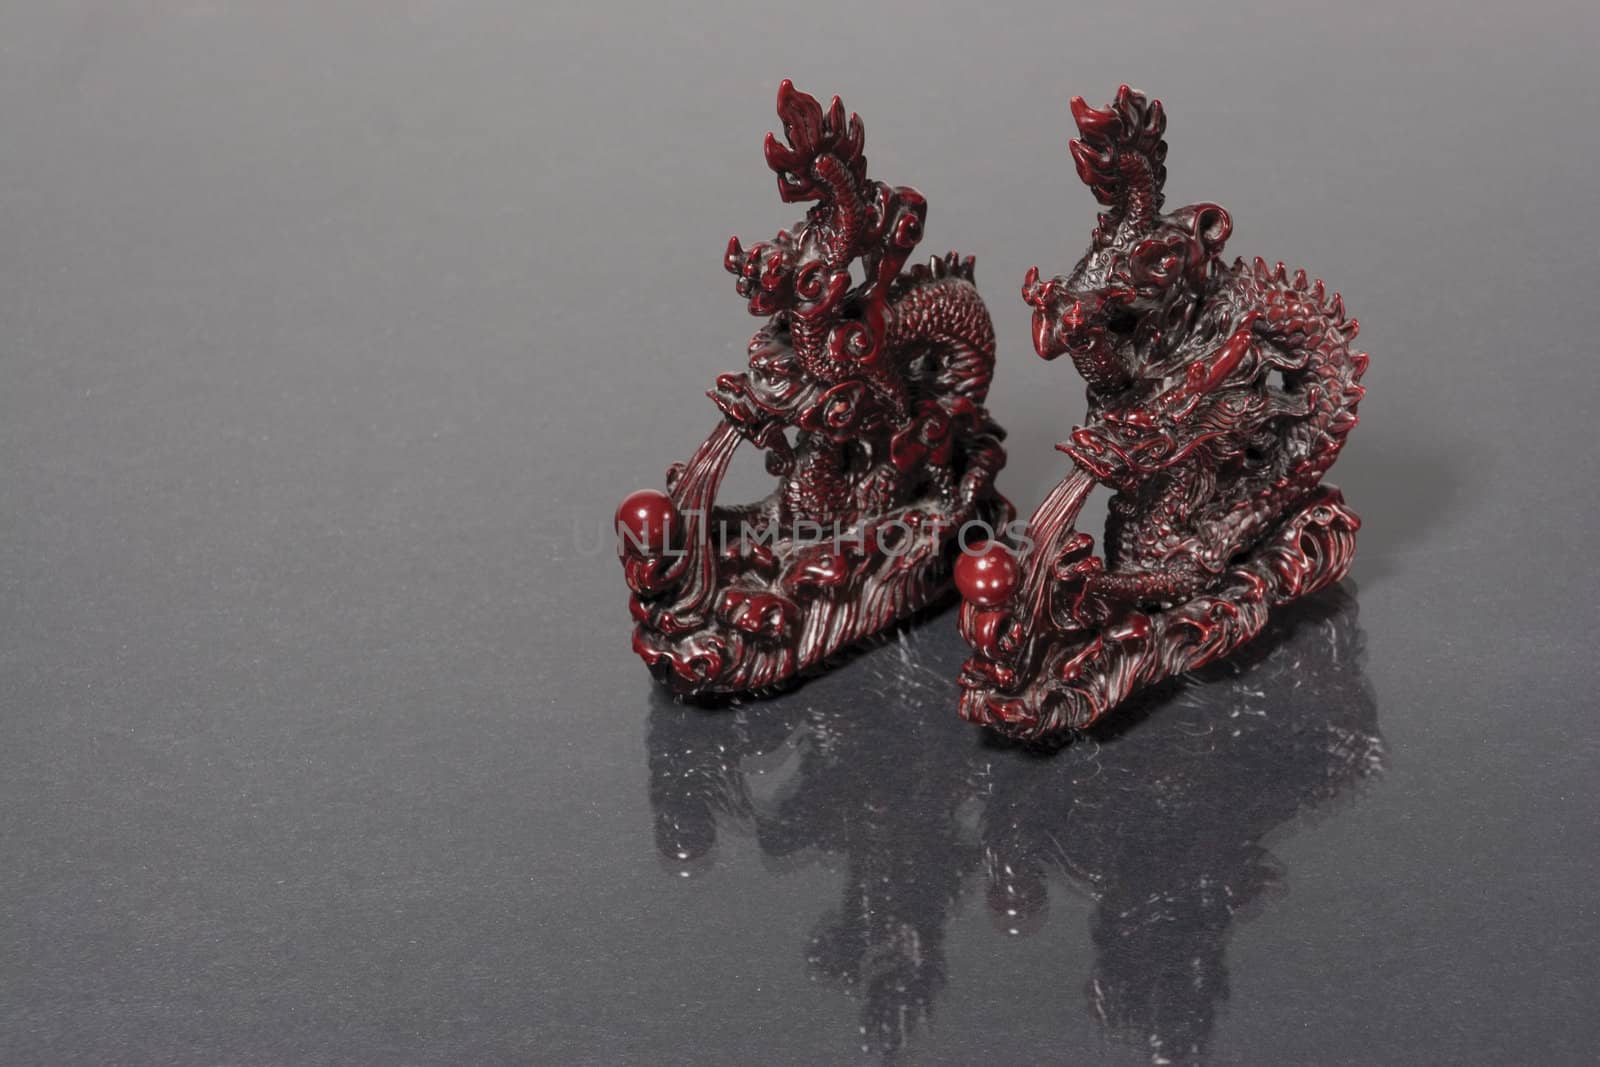 two dragon statue racing on a gray reflective surface